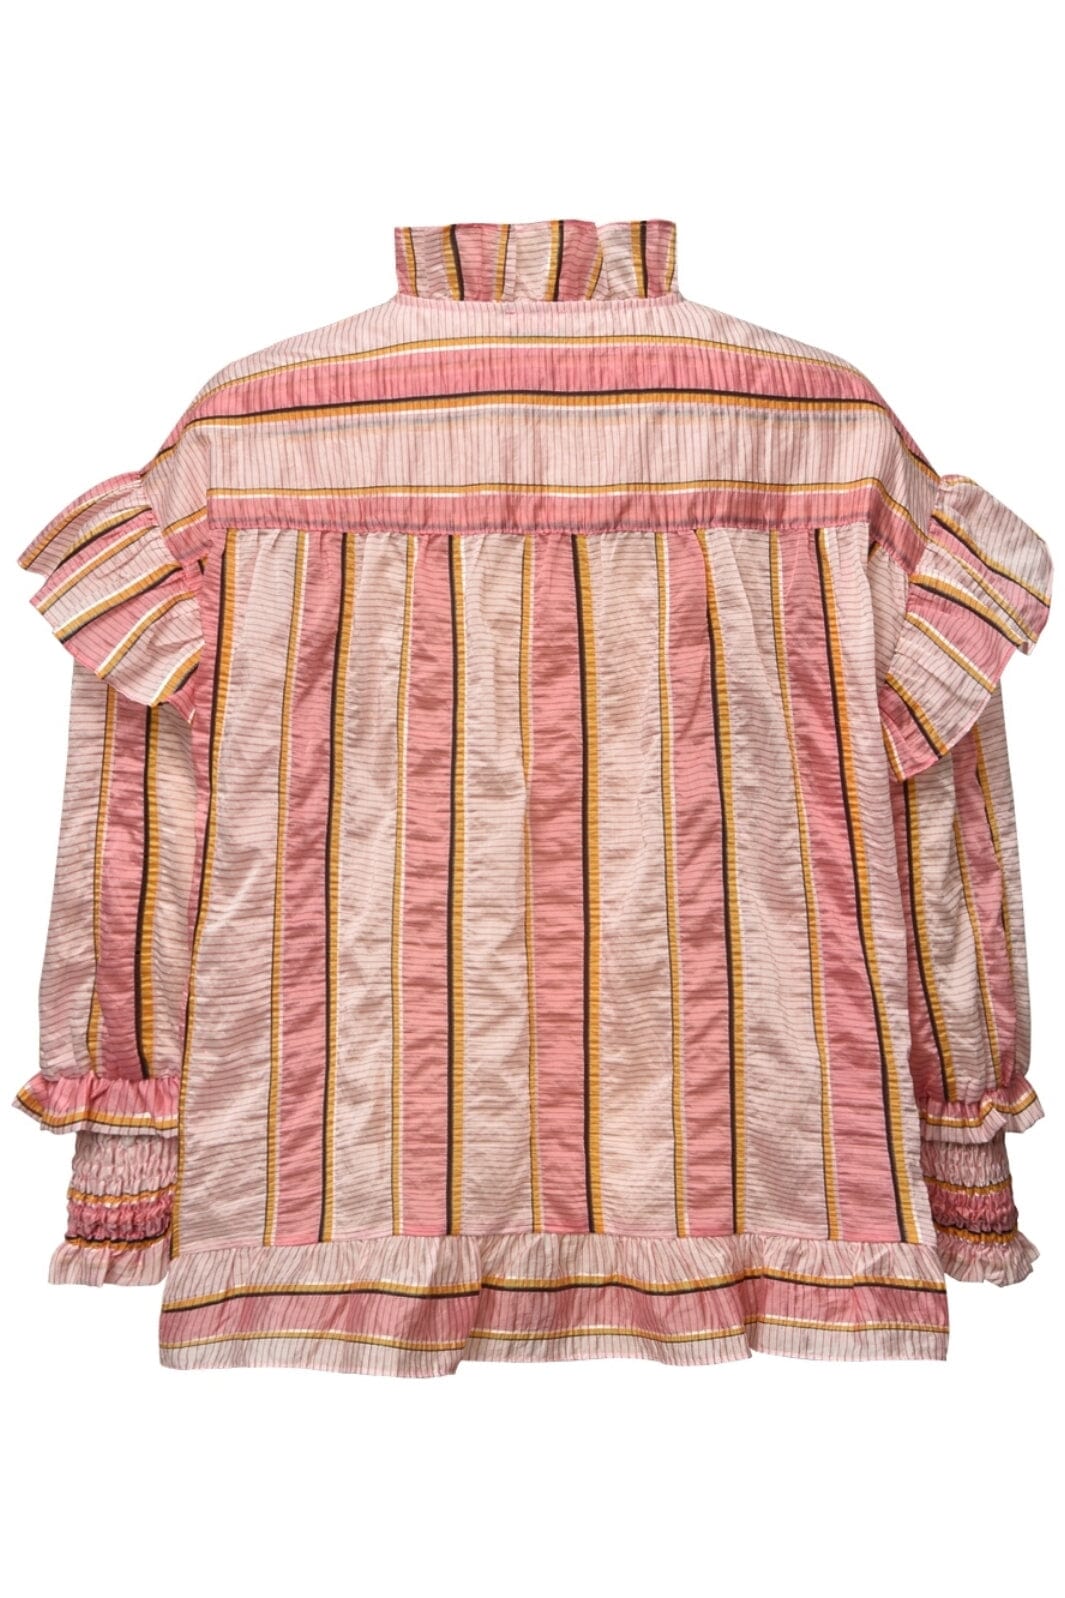 Gossia - NinneGO Blouse - Pink Mix Bluser 